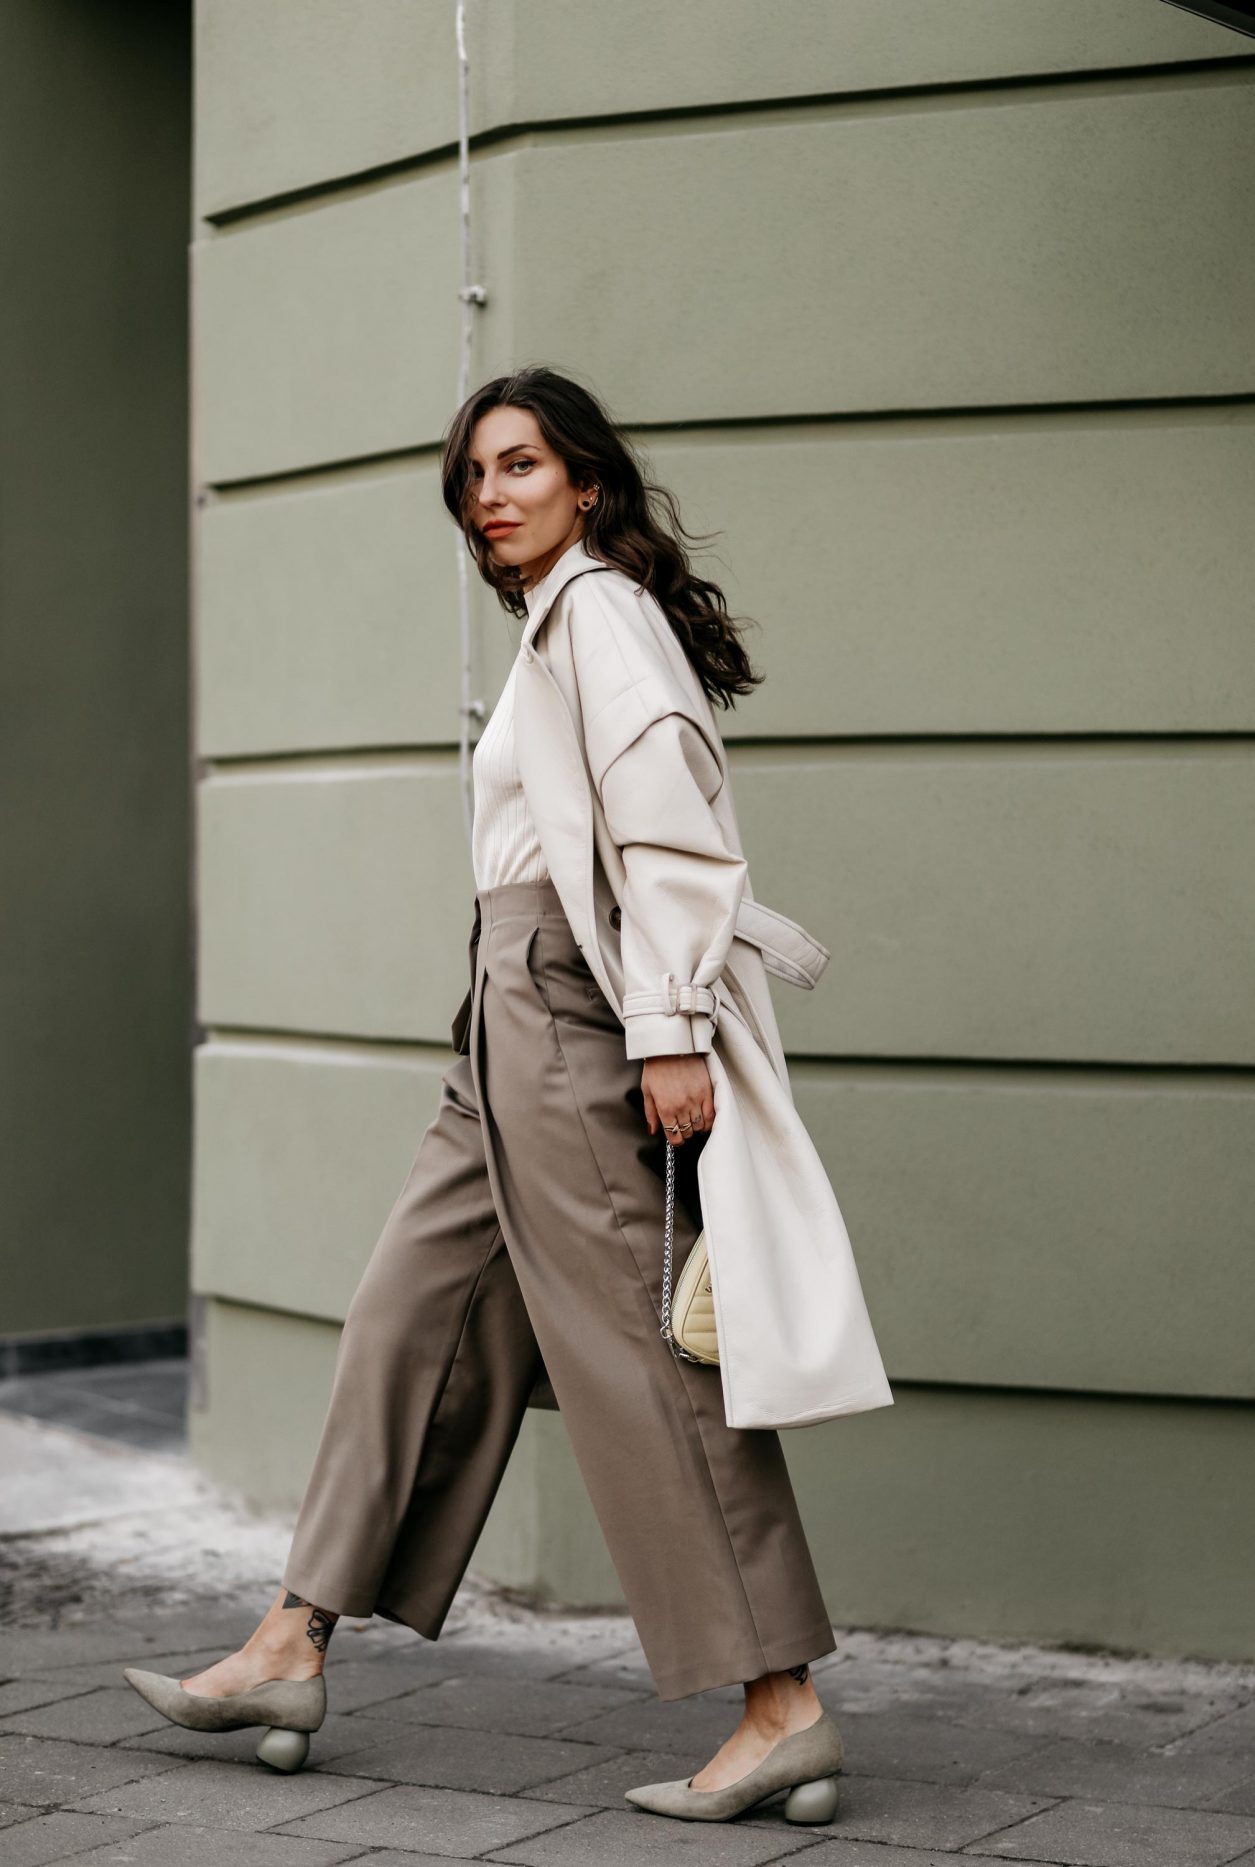 Spring Streetstyle outfit by Berlin fashion blogger Masha Sedgwick | Minimalistic, effortless cool, casual chic, wearing off white lack leather Apparis trench coat, off white Iris & Ink knit shirt, brown wide Frankie Shop pants with front pocket, lemon yellow WEAT crossbody mini bag, golden rings and necklaces, khaki green Charles & Keith pumps, hair style: black waves, photographer Jeremy Moeller 